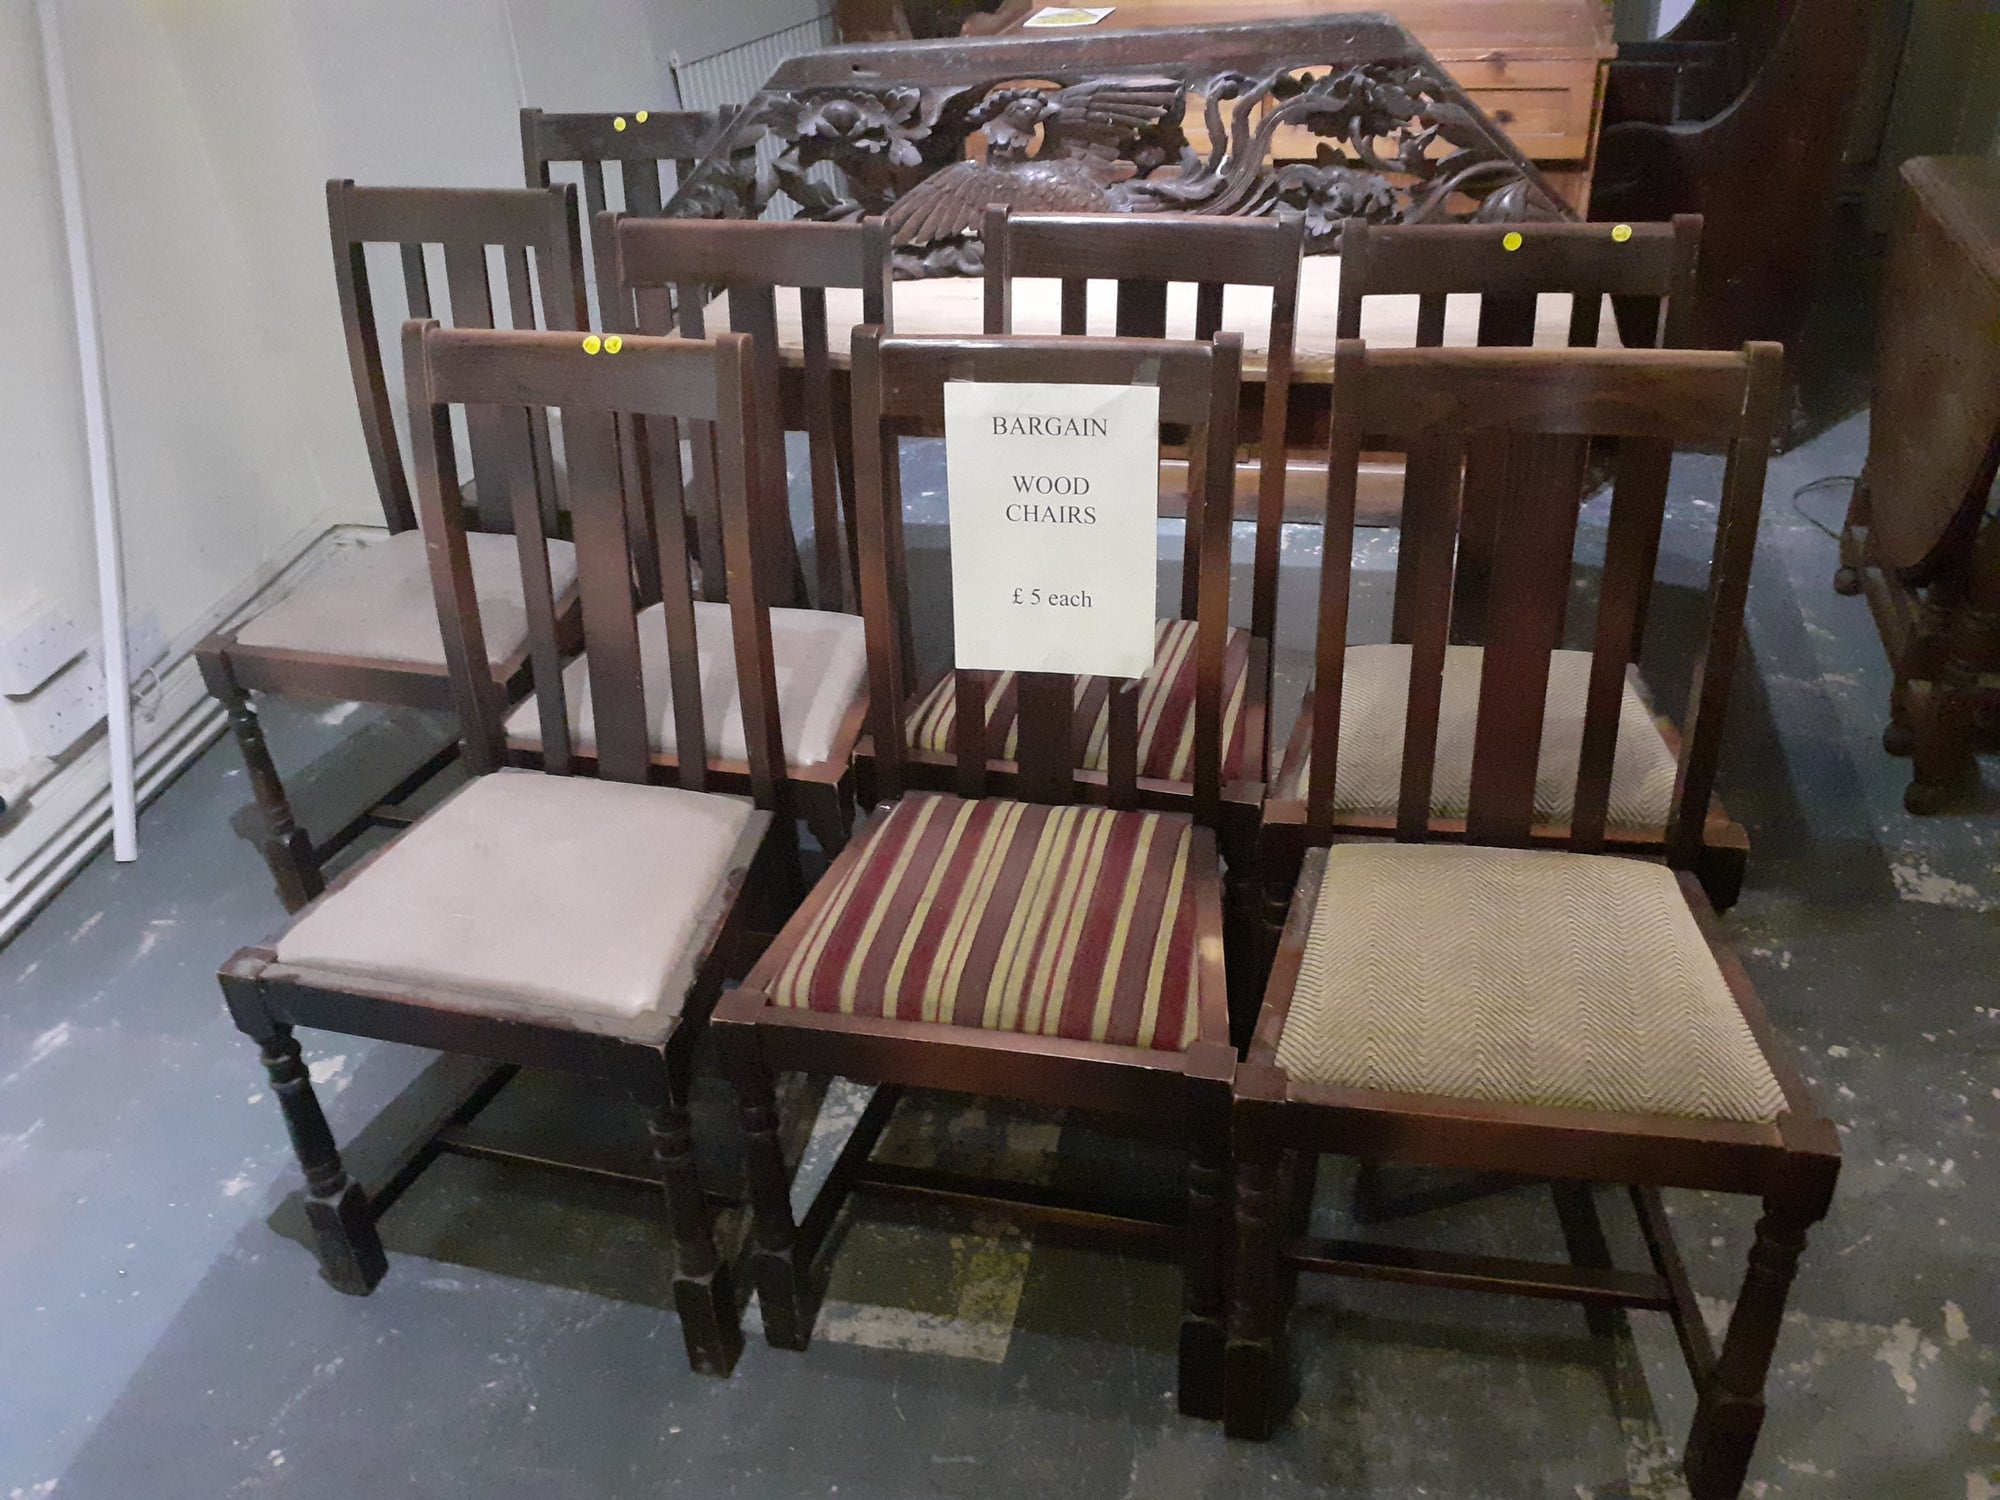 last few days of give away chairs £5 & £10 to make space for new dealer